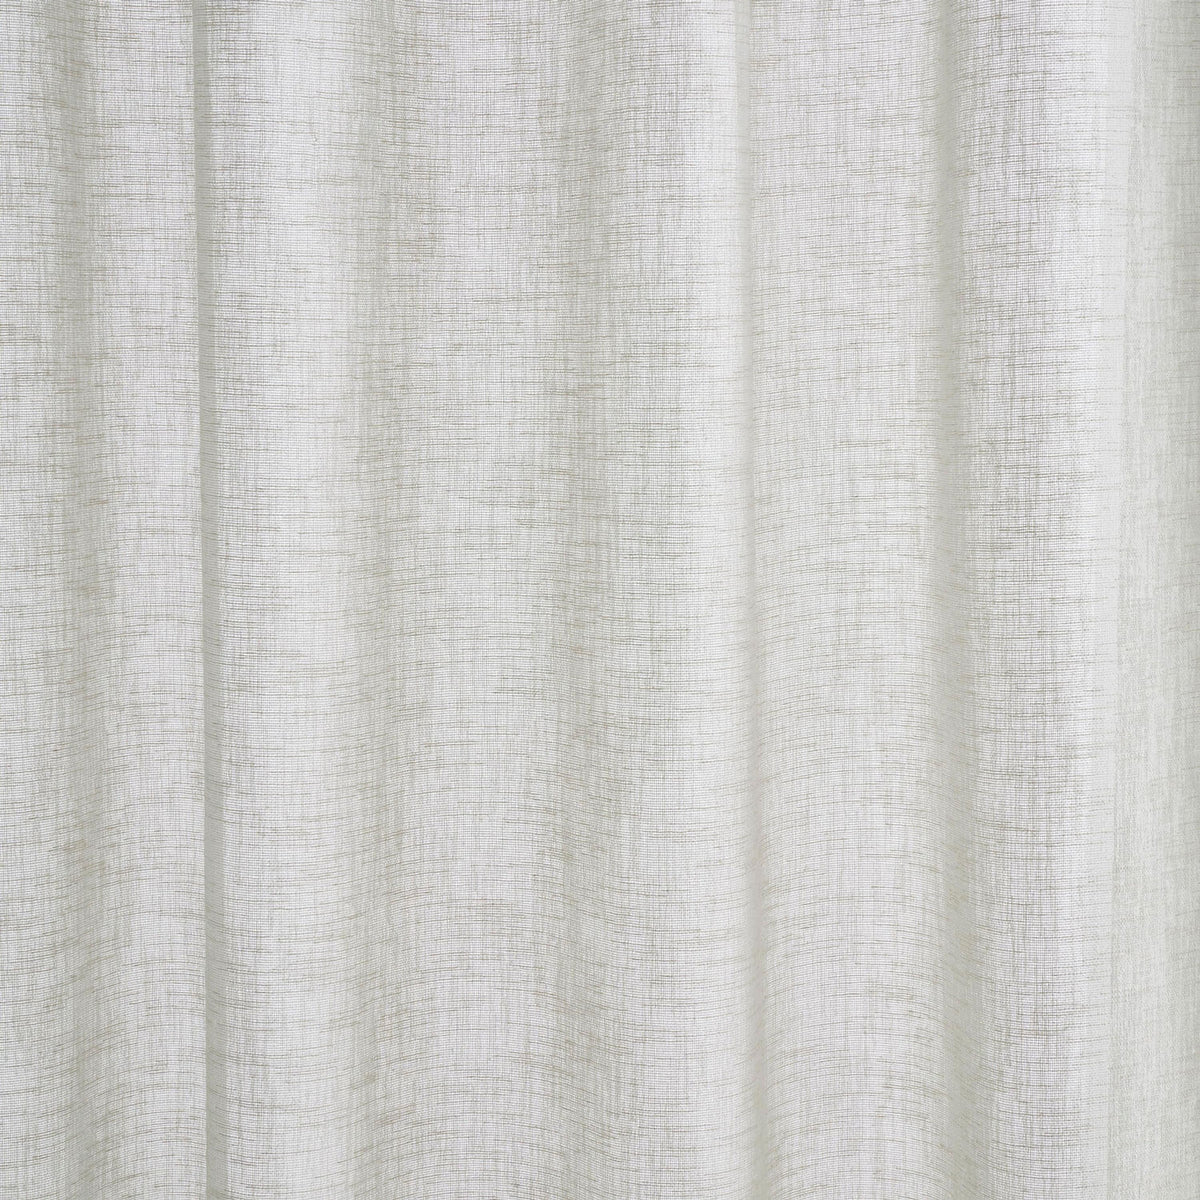 Eco Voile Curtains - 140x120